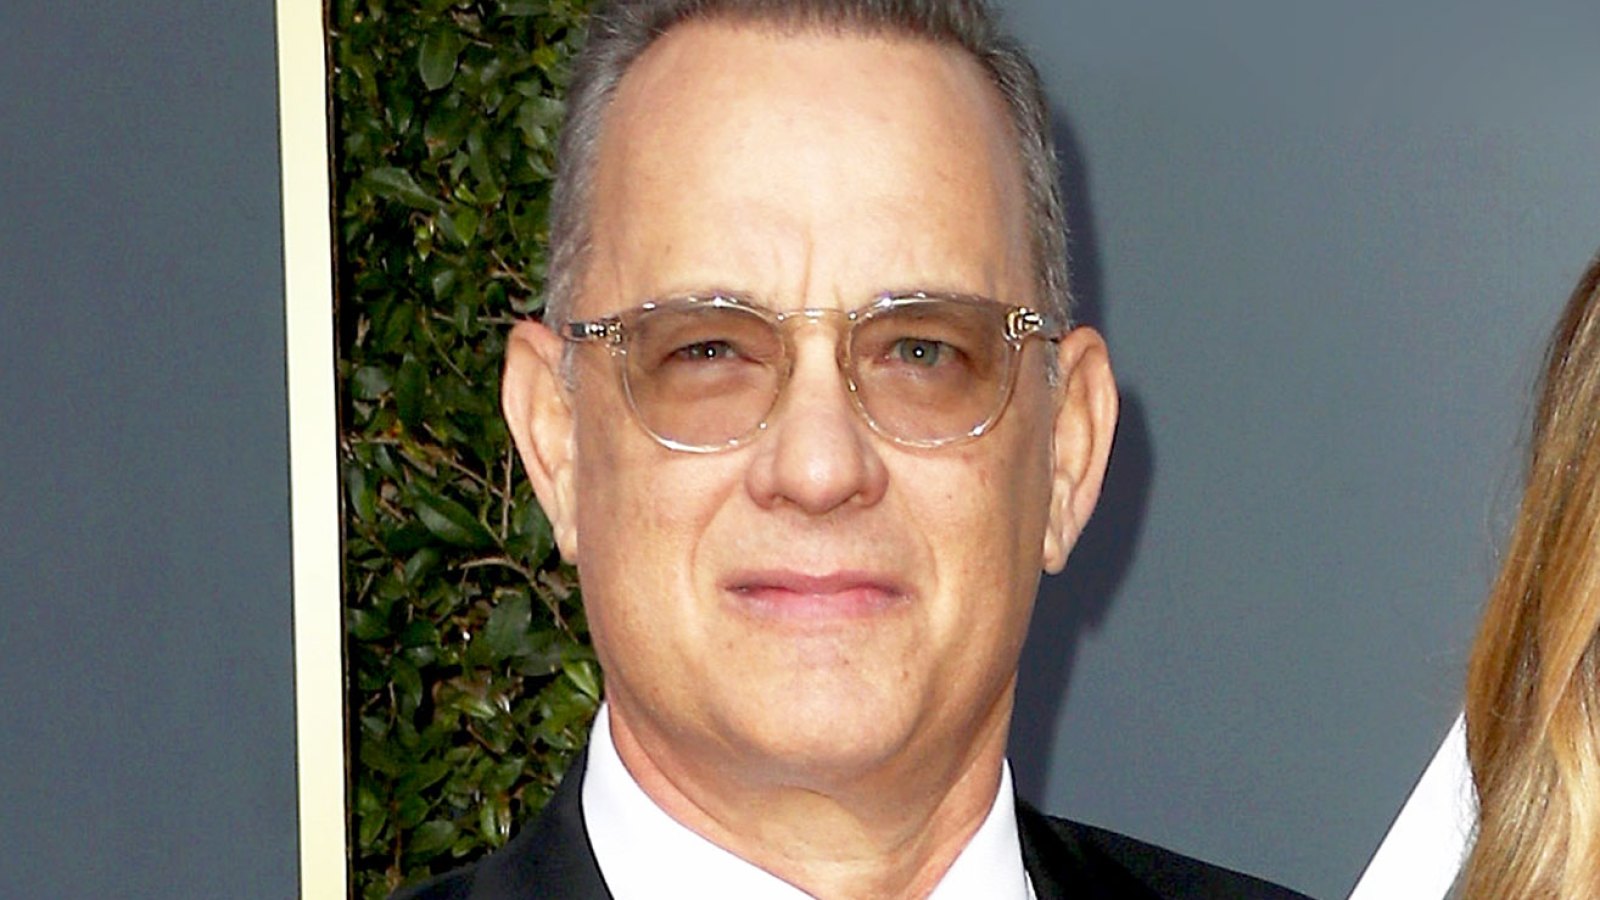 Tom Hanks attends The 75th Annual Golden Globe Awards at The Beverly Hilton Hotel on January 7, 2018 in Beverly Hills, California.